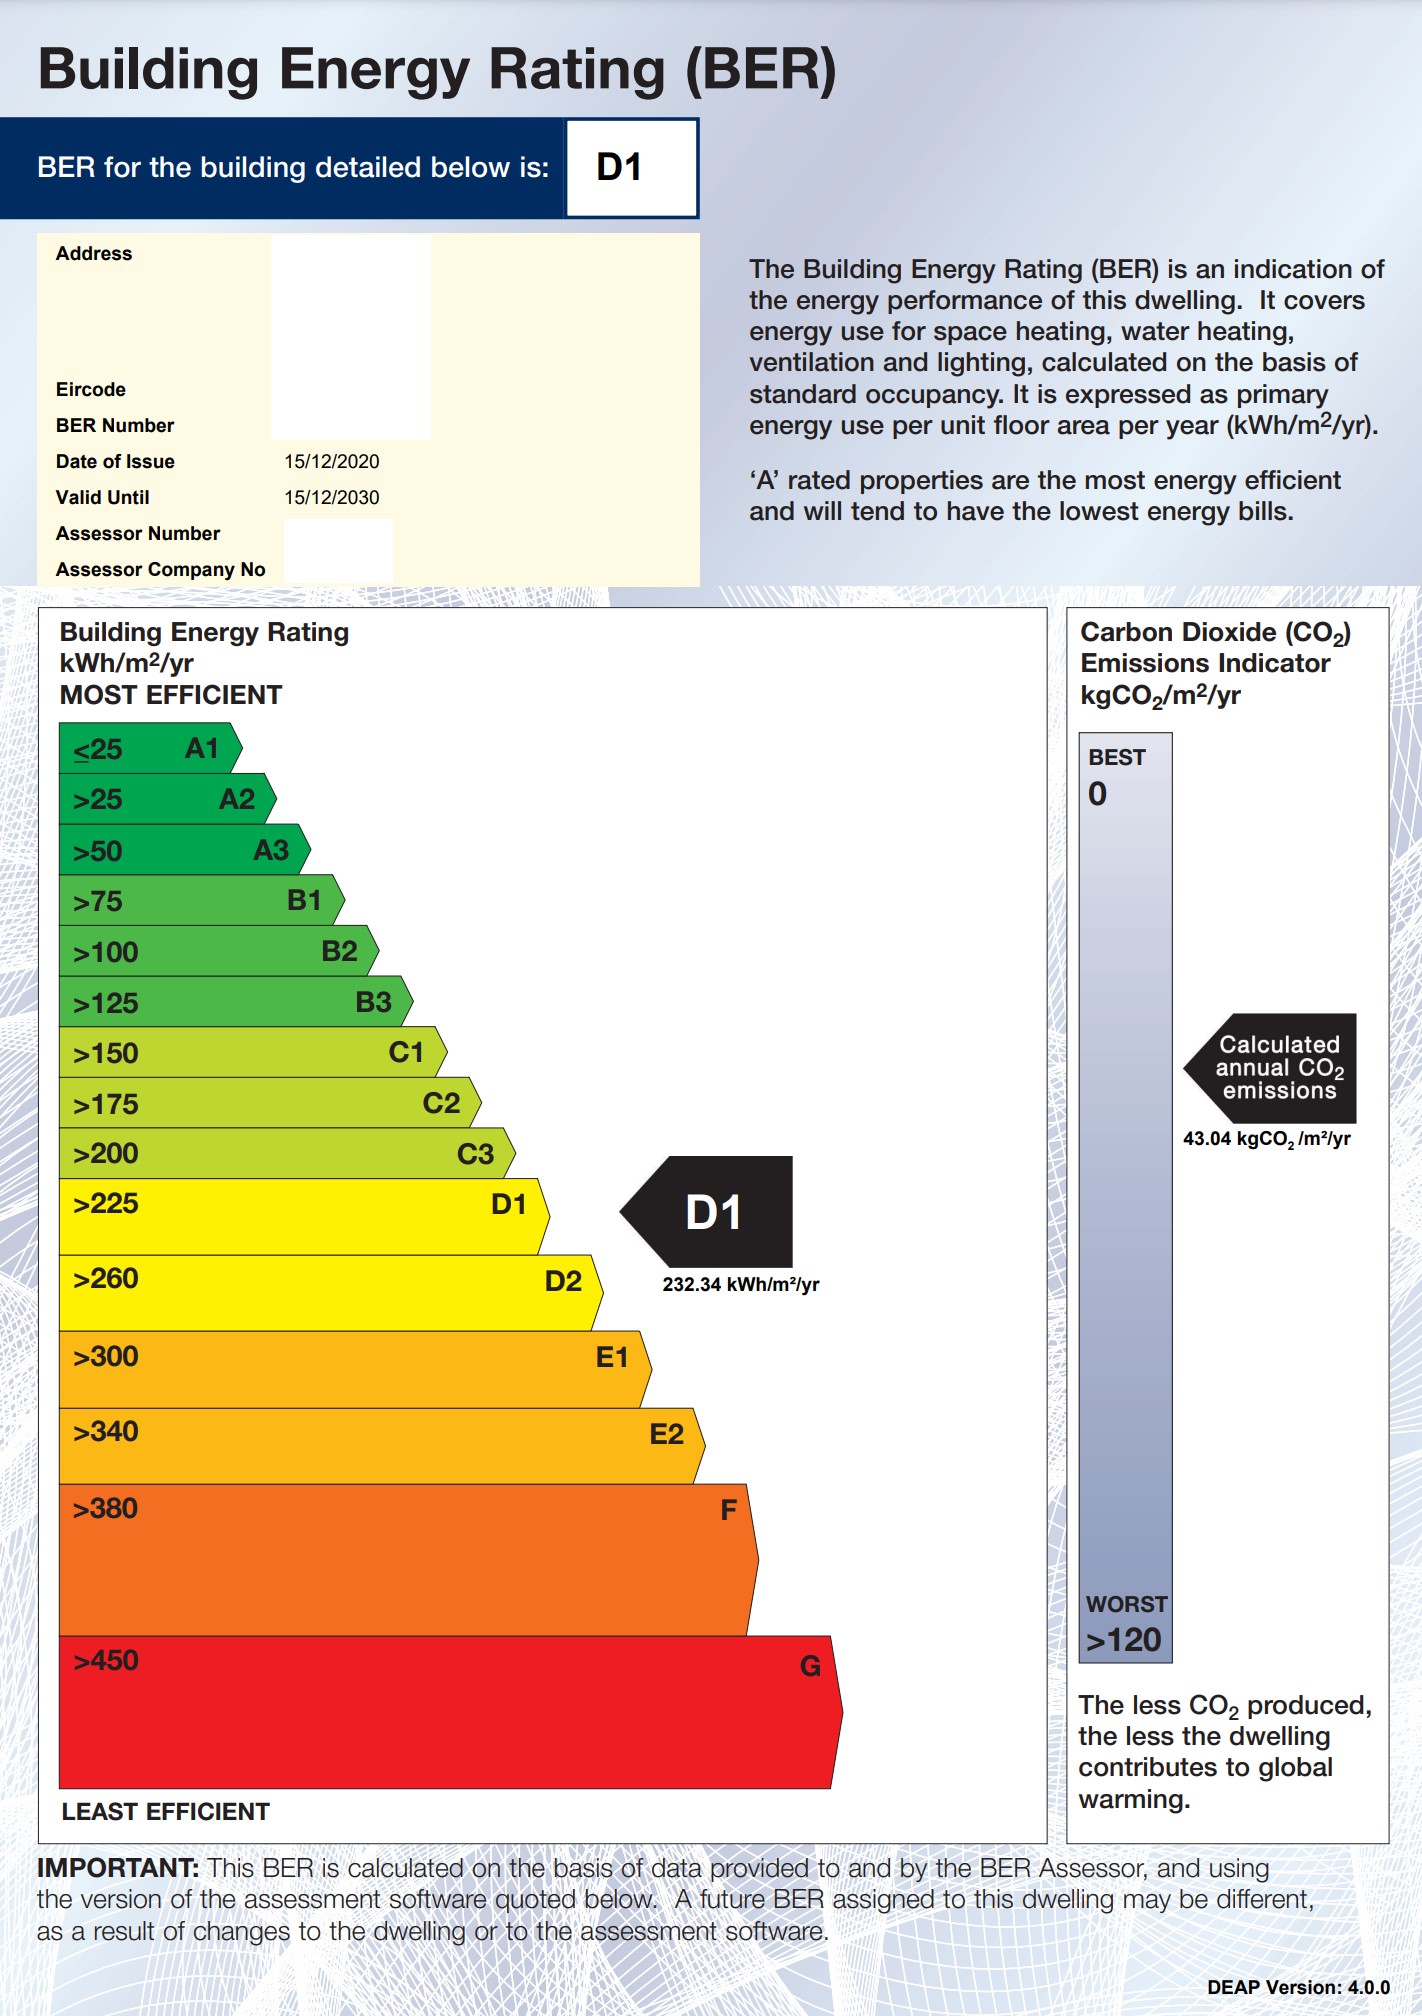 Building Energy Rating (BER) table showing the scale A1 to G